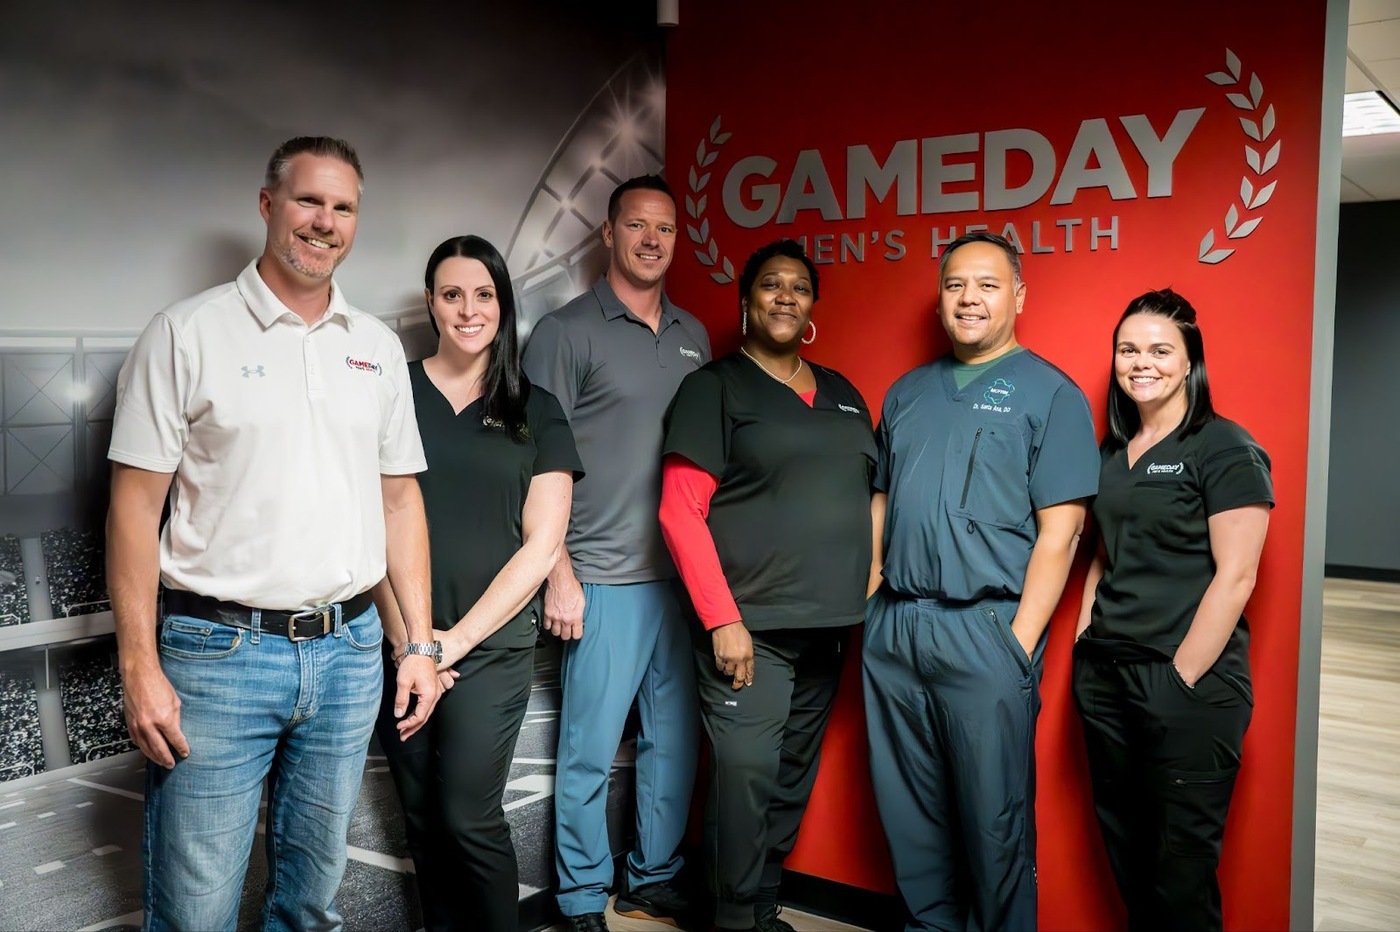 Gameday Men’s Health Rochester is a premier men’s health clinic offering top-notch services to optimize health and wellness.